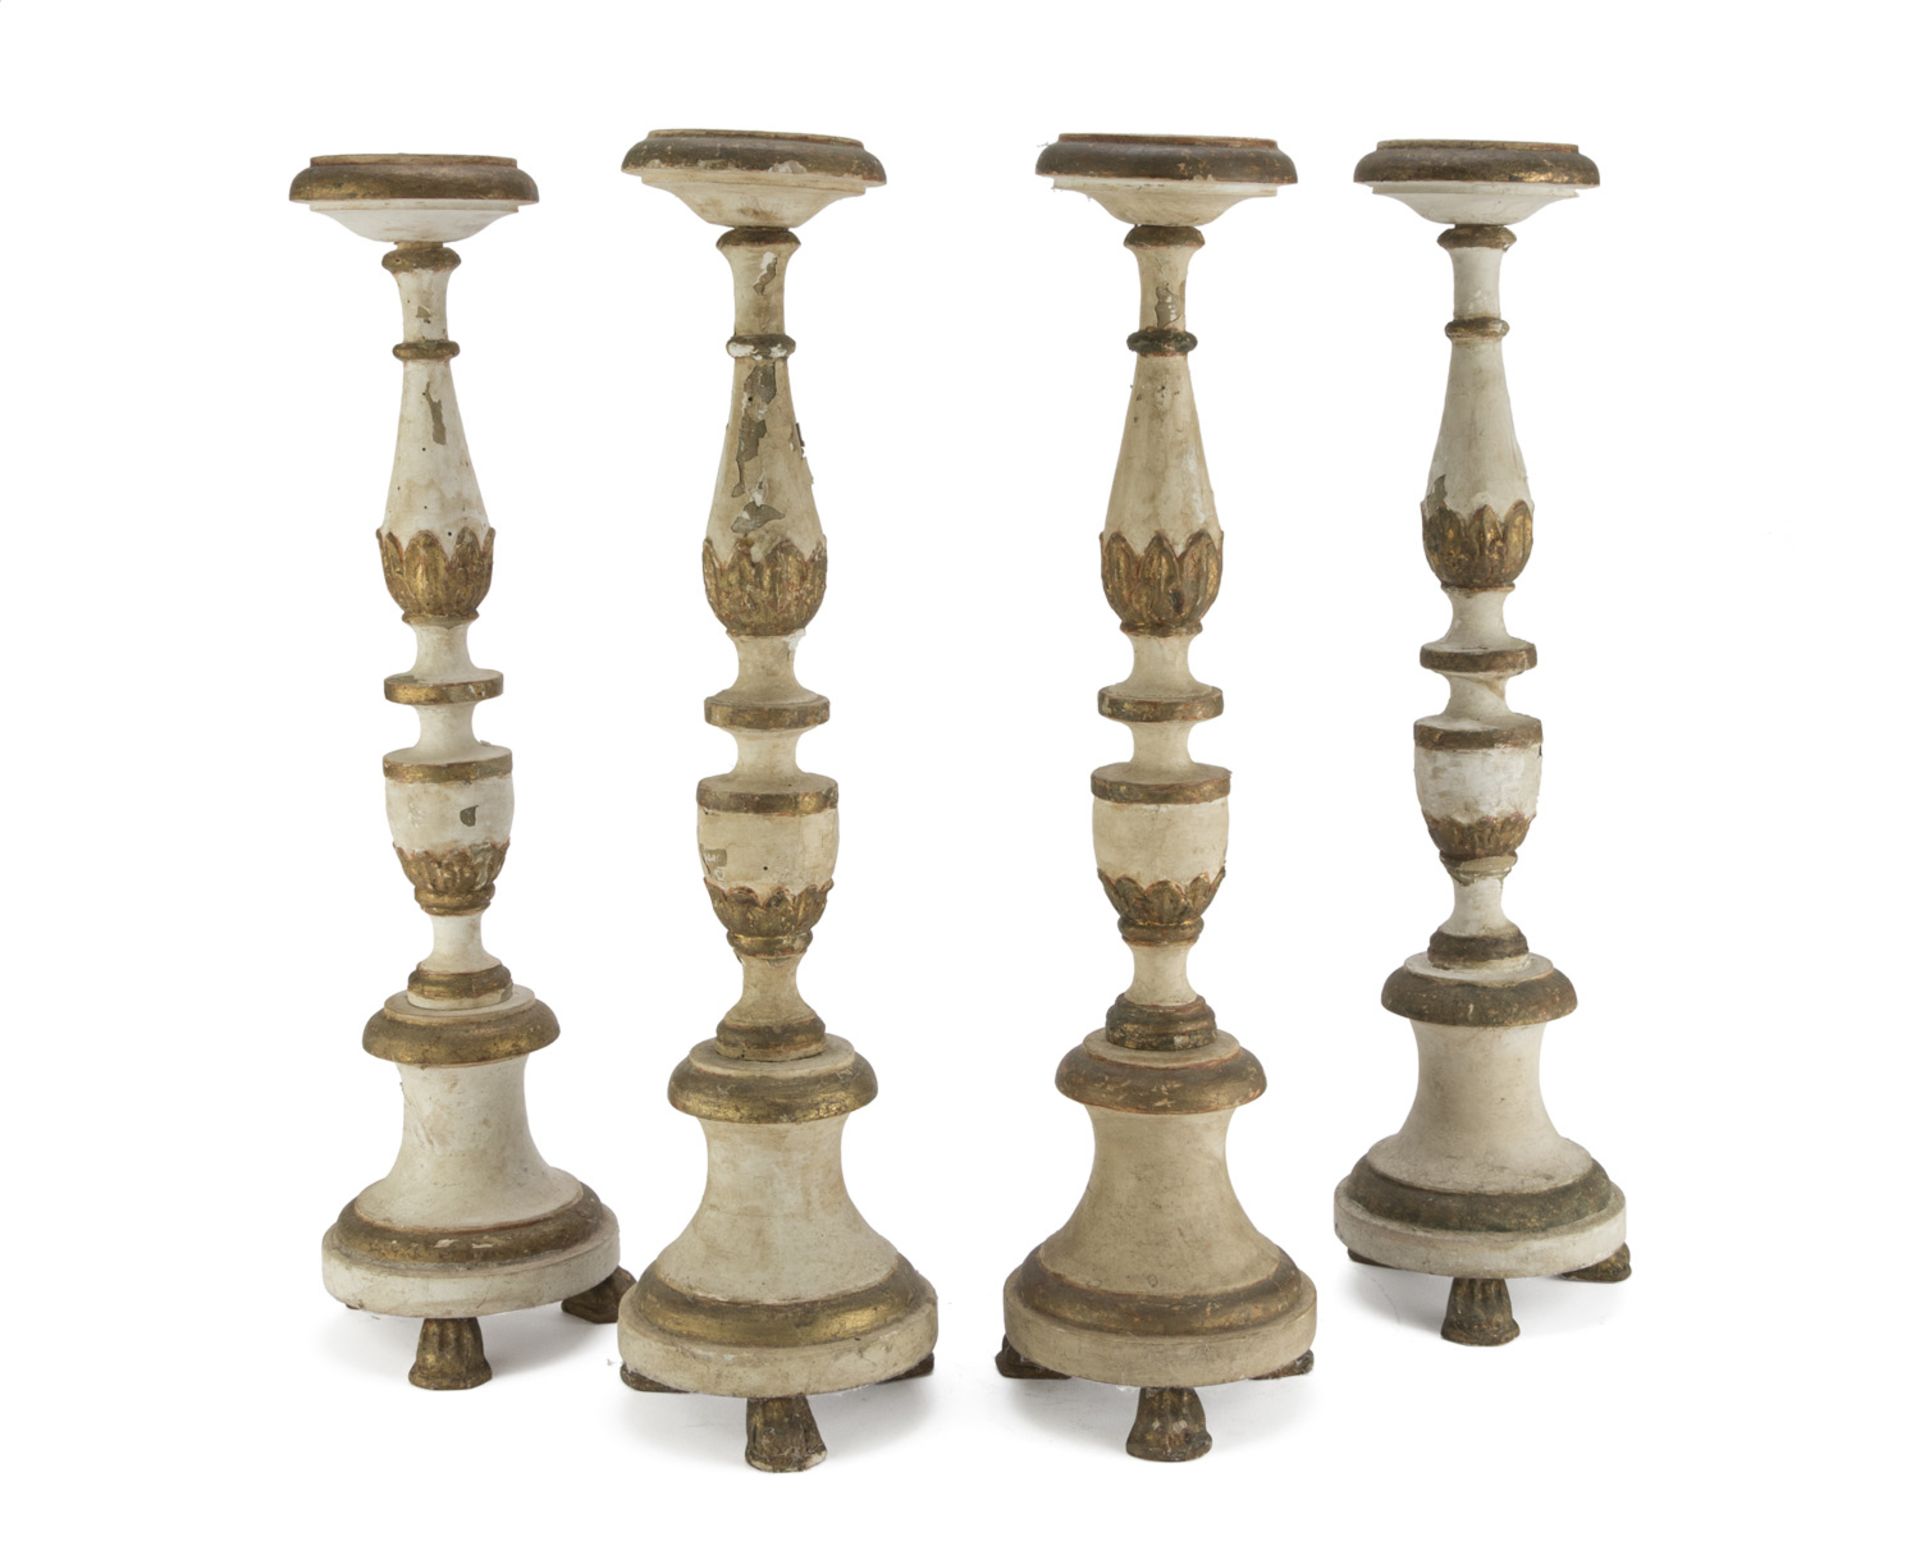 FOUR WHITE AND GOLD LACQUERED CANDLESTICKS, MARCHE LATE 18TH CENTURY cylindrical shaft i highlighted